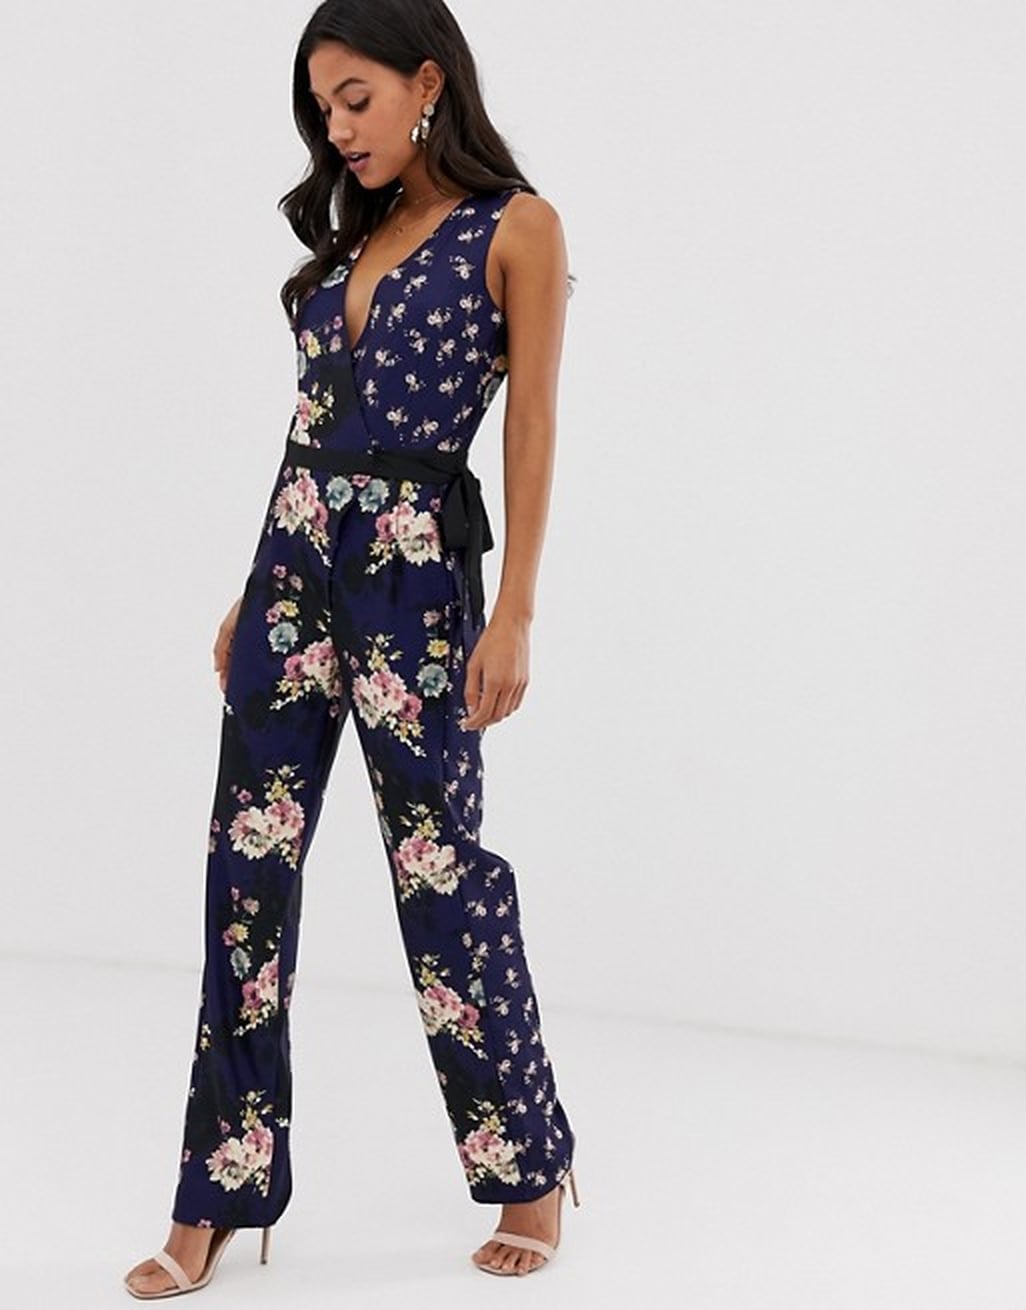 Shop the Mixed Floral-Print Clothes Trend For Spring 2020 | POPSUGAR ...